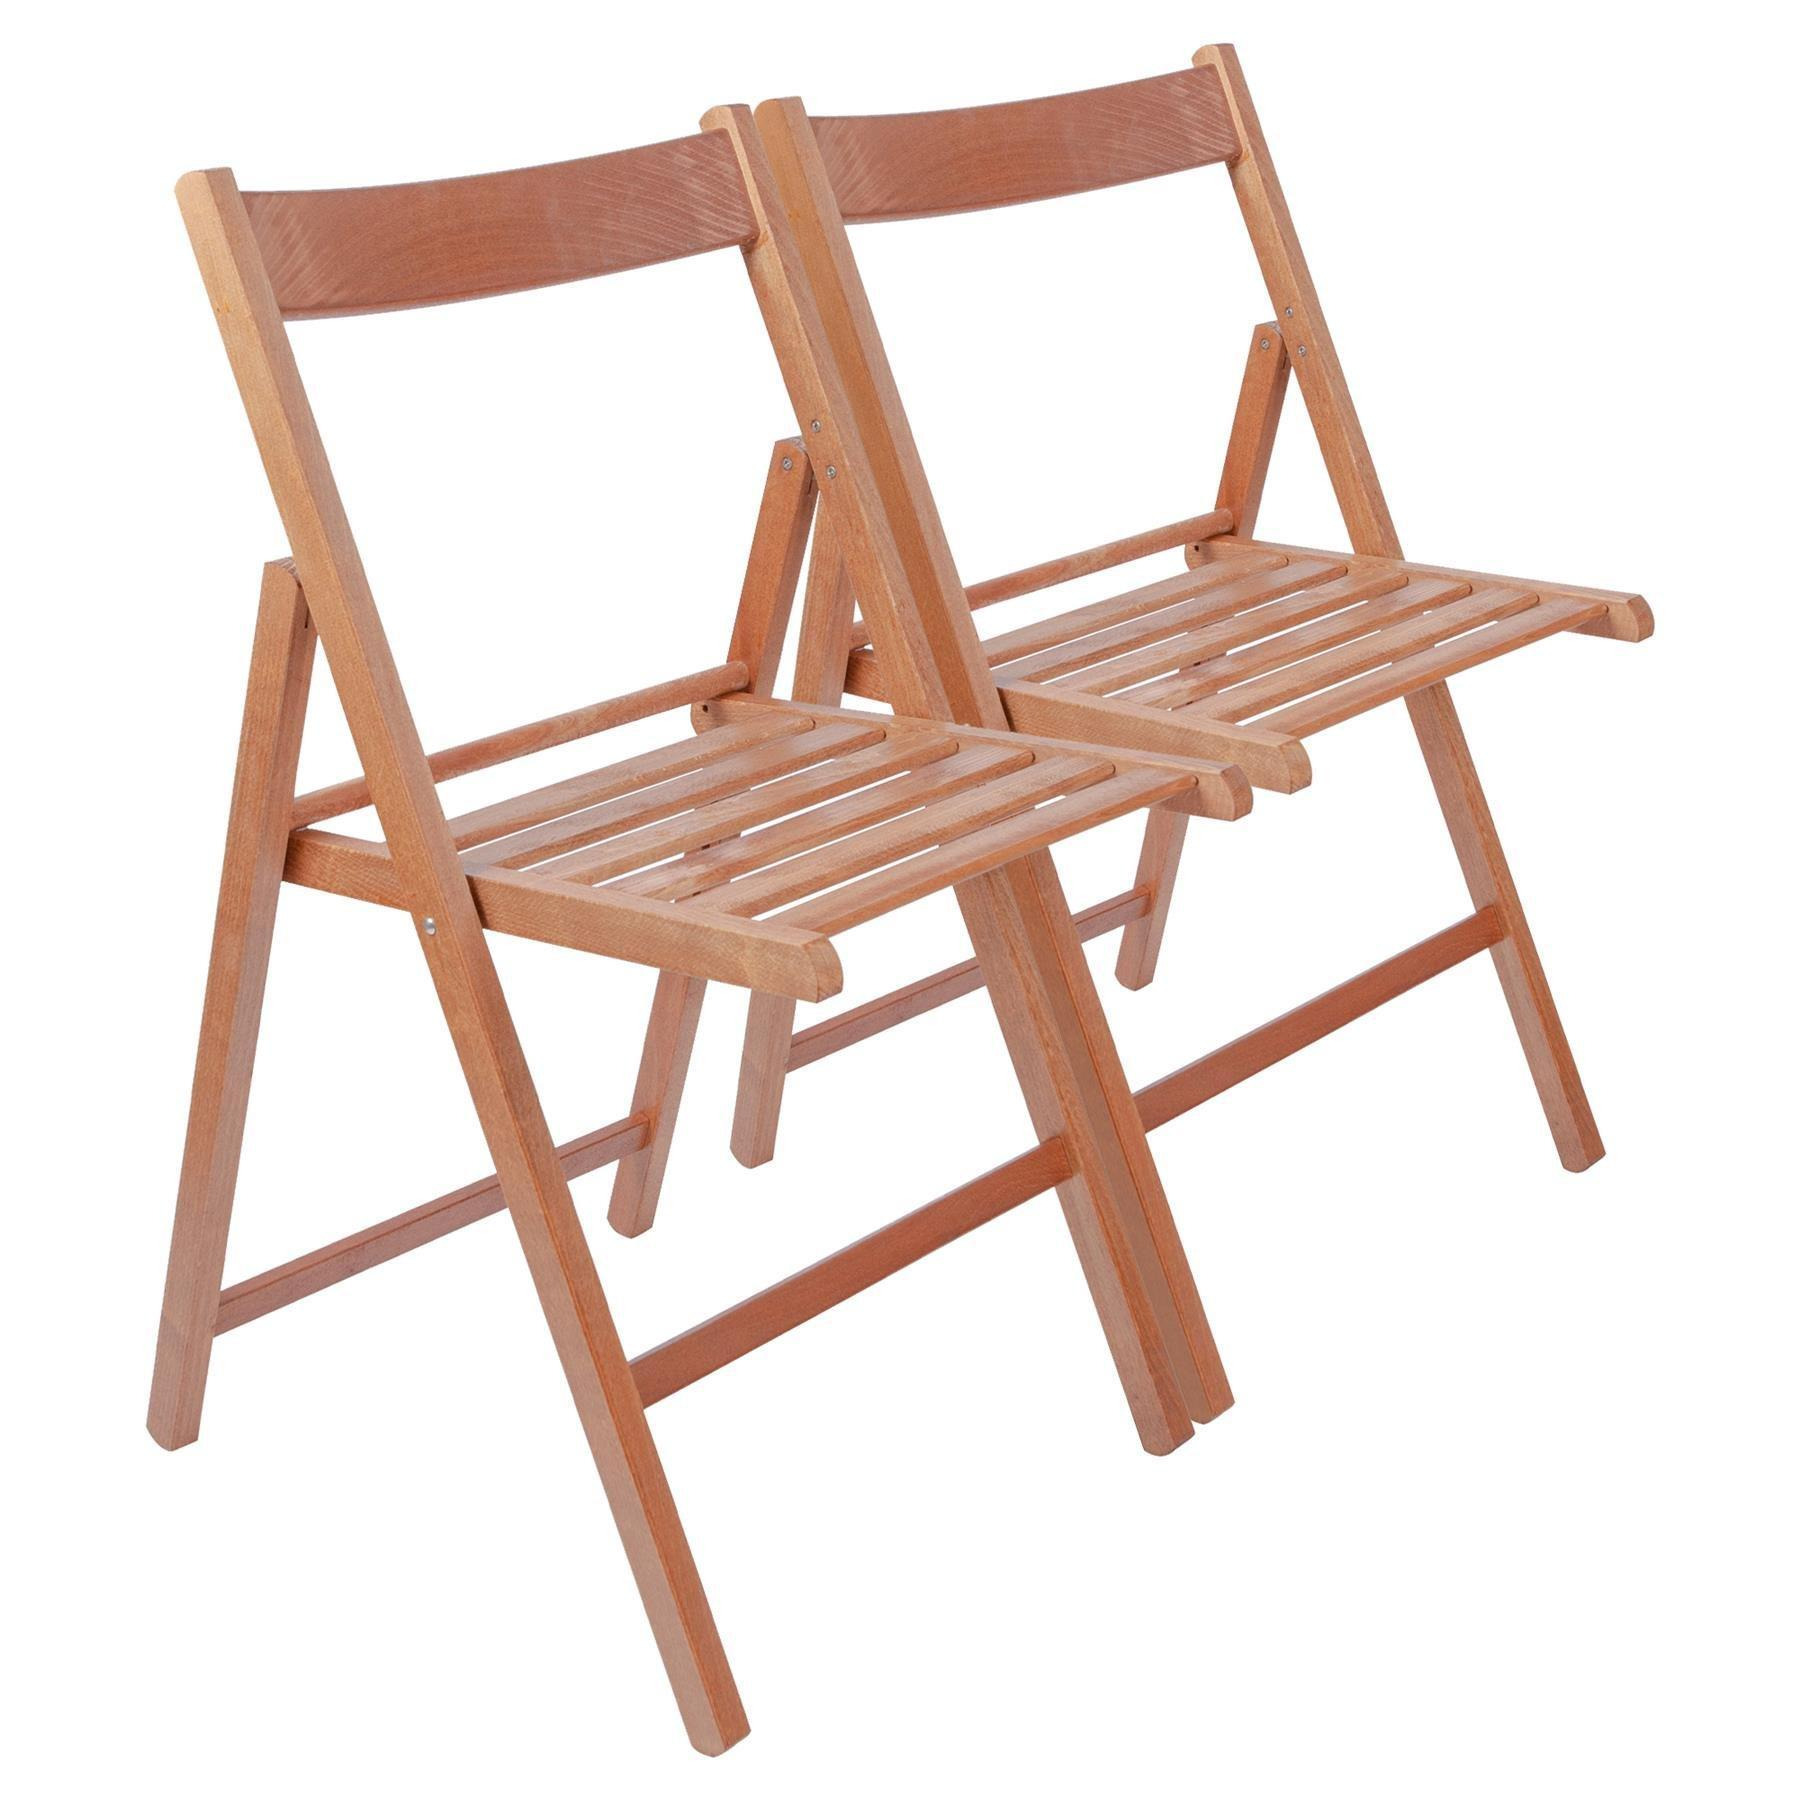 Beech Wood Folding Chairs Pack of 2 - image 1